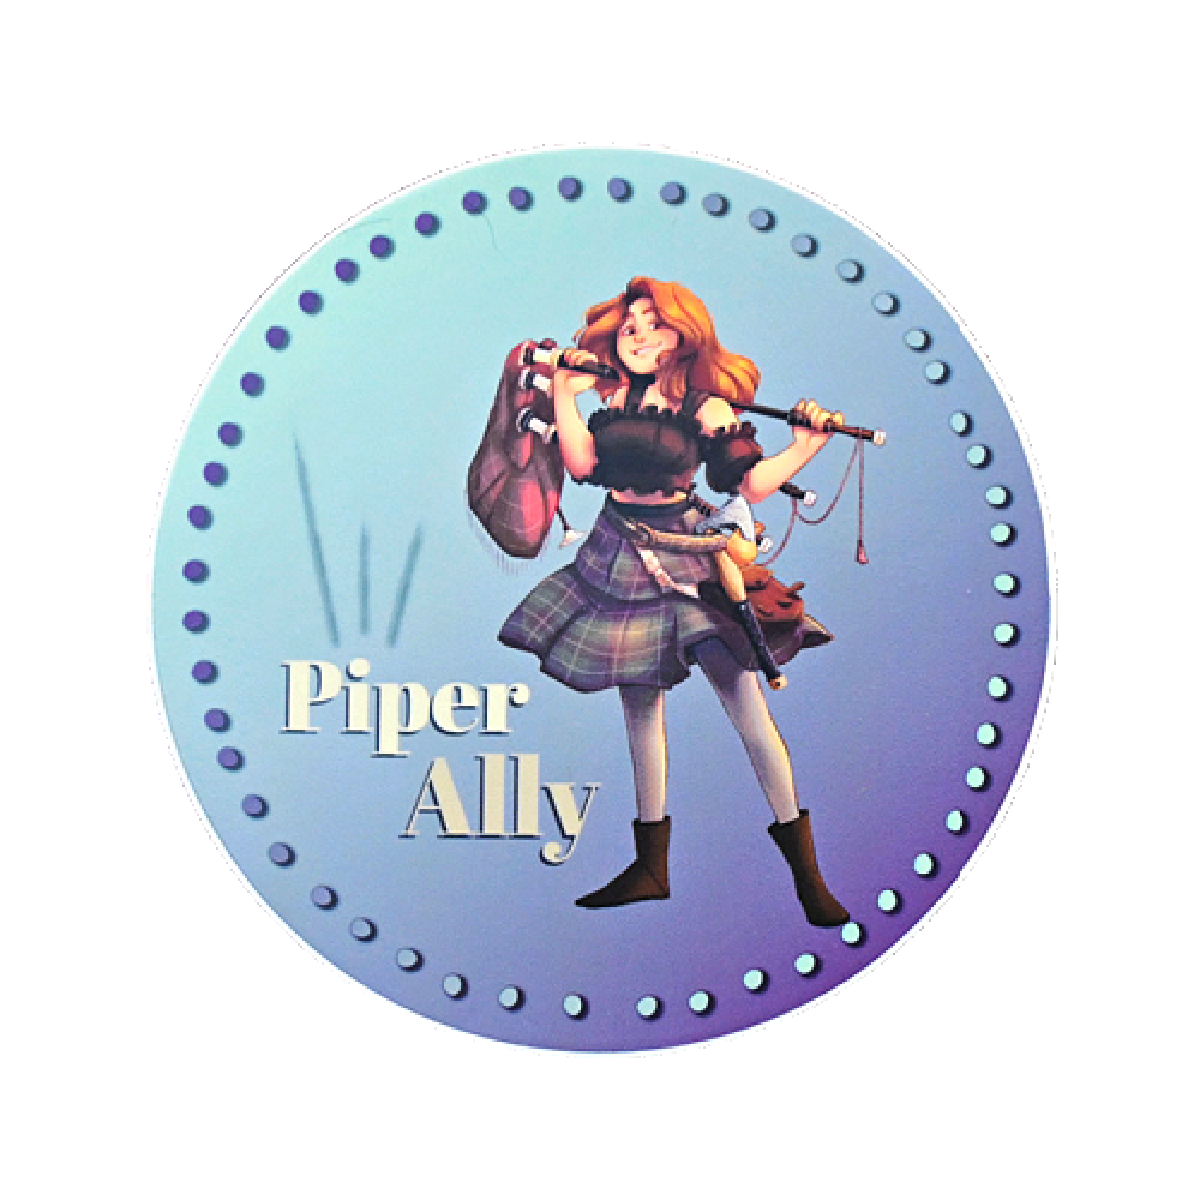 Official Piper Ally sticker